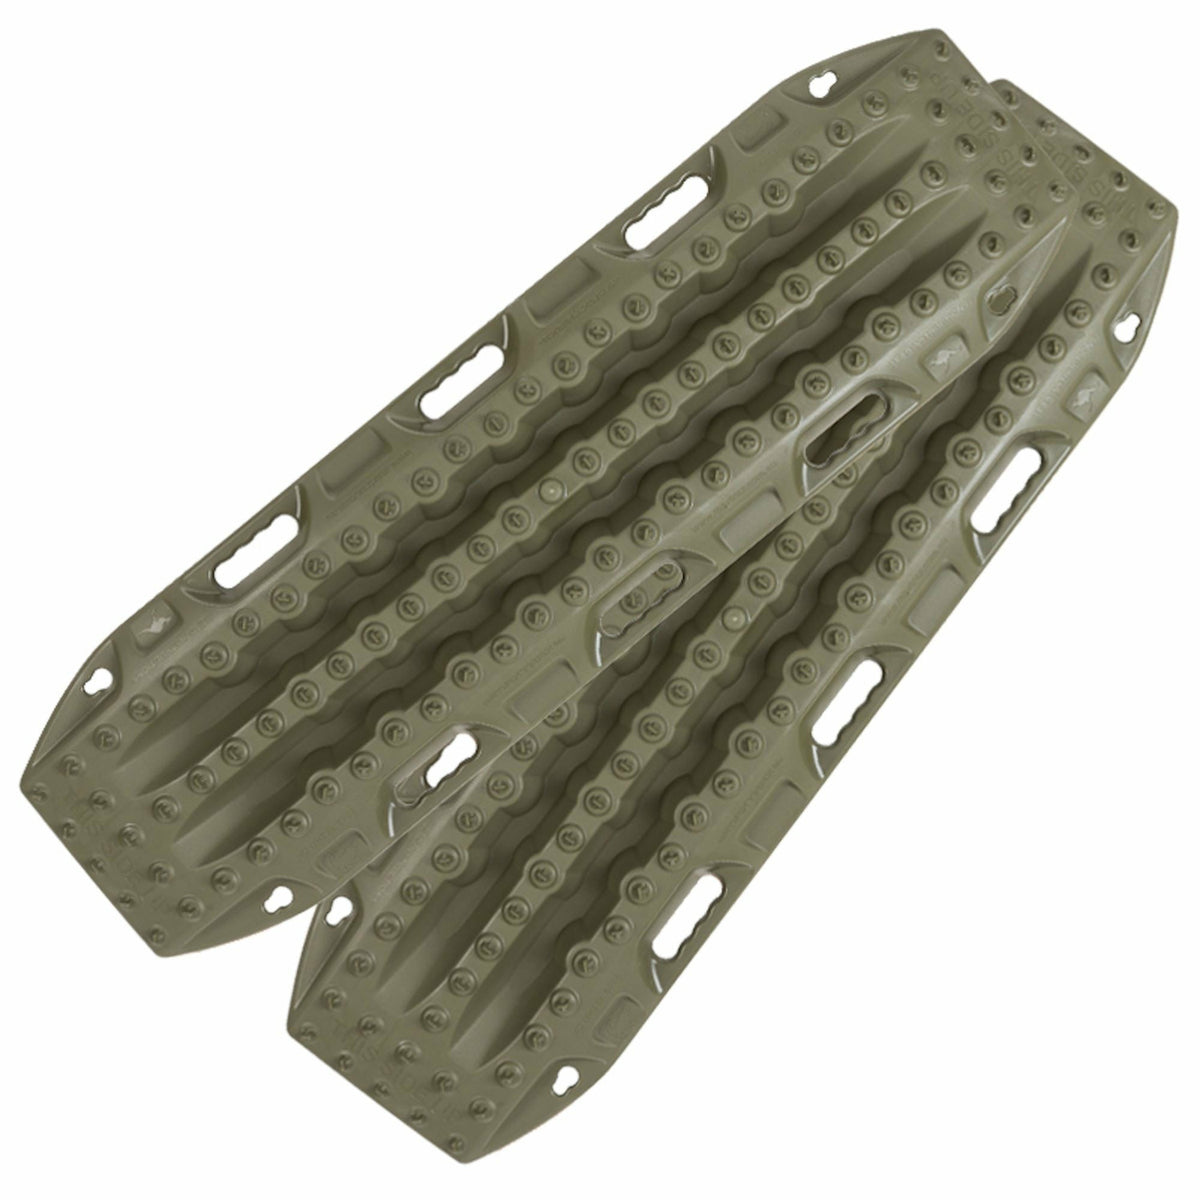 MAXTRAX MKII Olive Drab Recovery Boards  Recovery Gear MAXTRAX- Overland Kitted